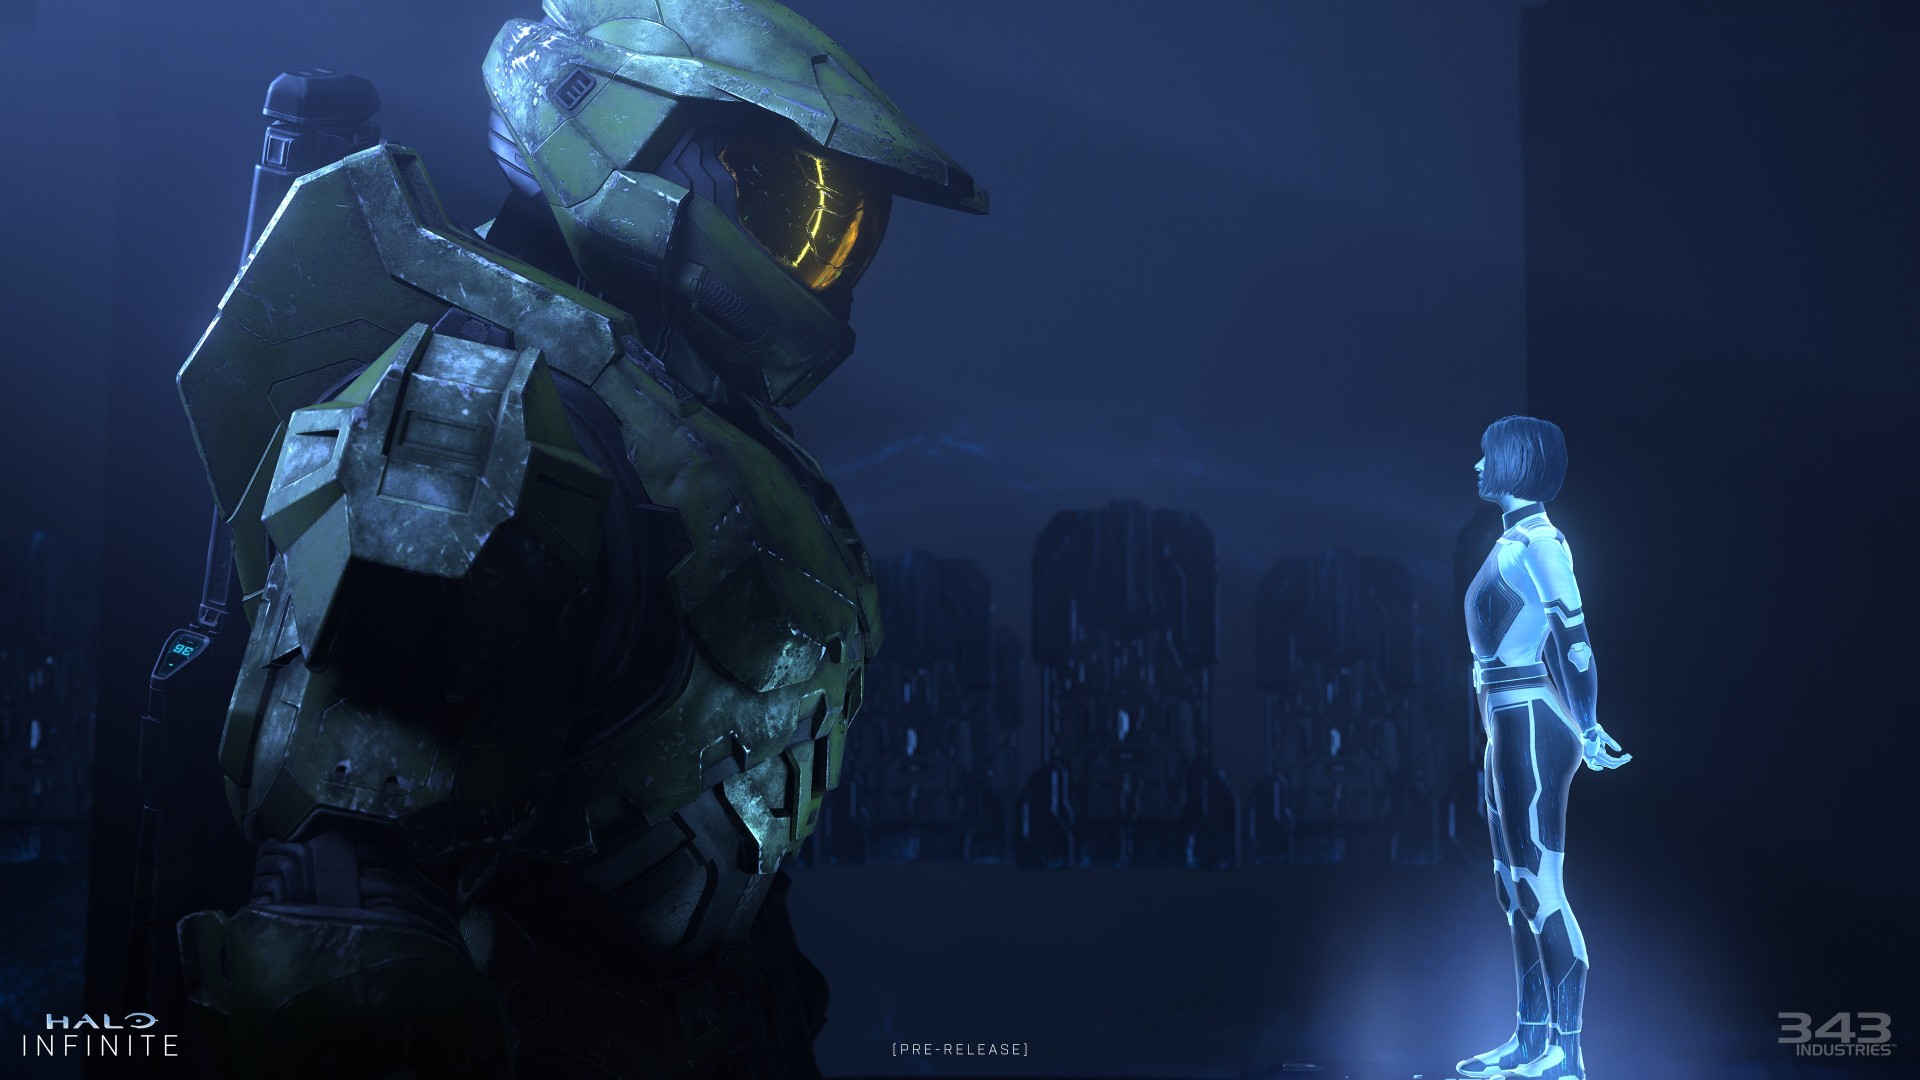 Halo Infinite Campaign - December 8th - Optimized for Xbox Series X | S - Xbox Game Pass